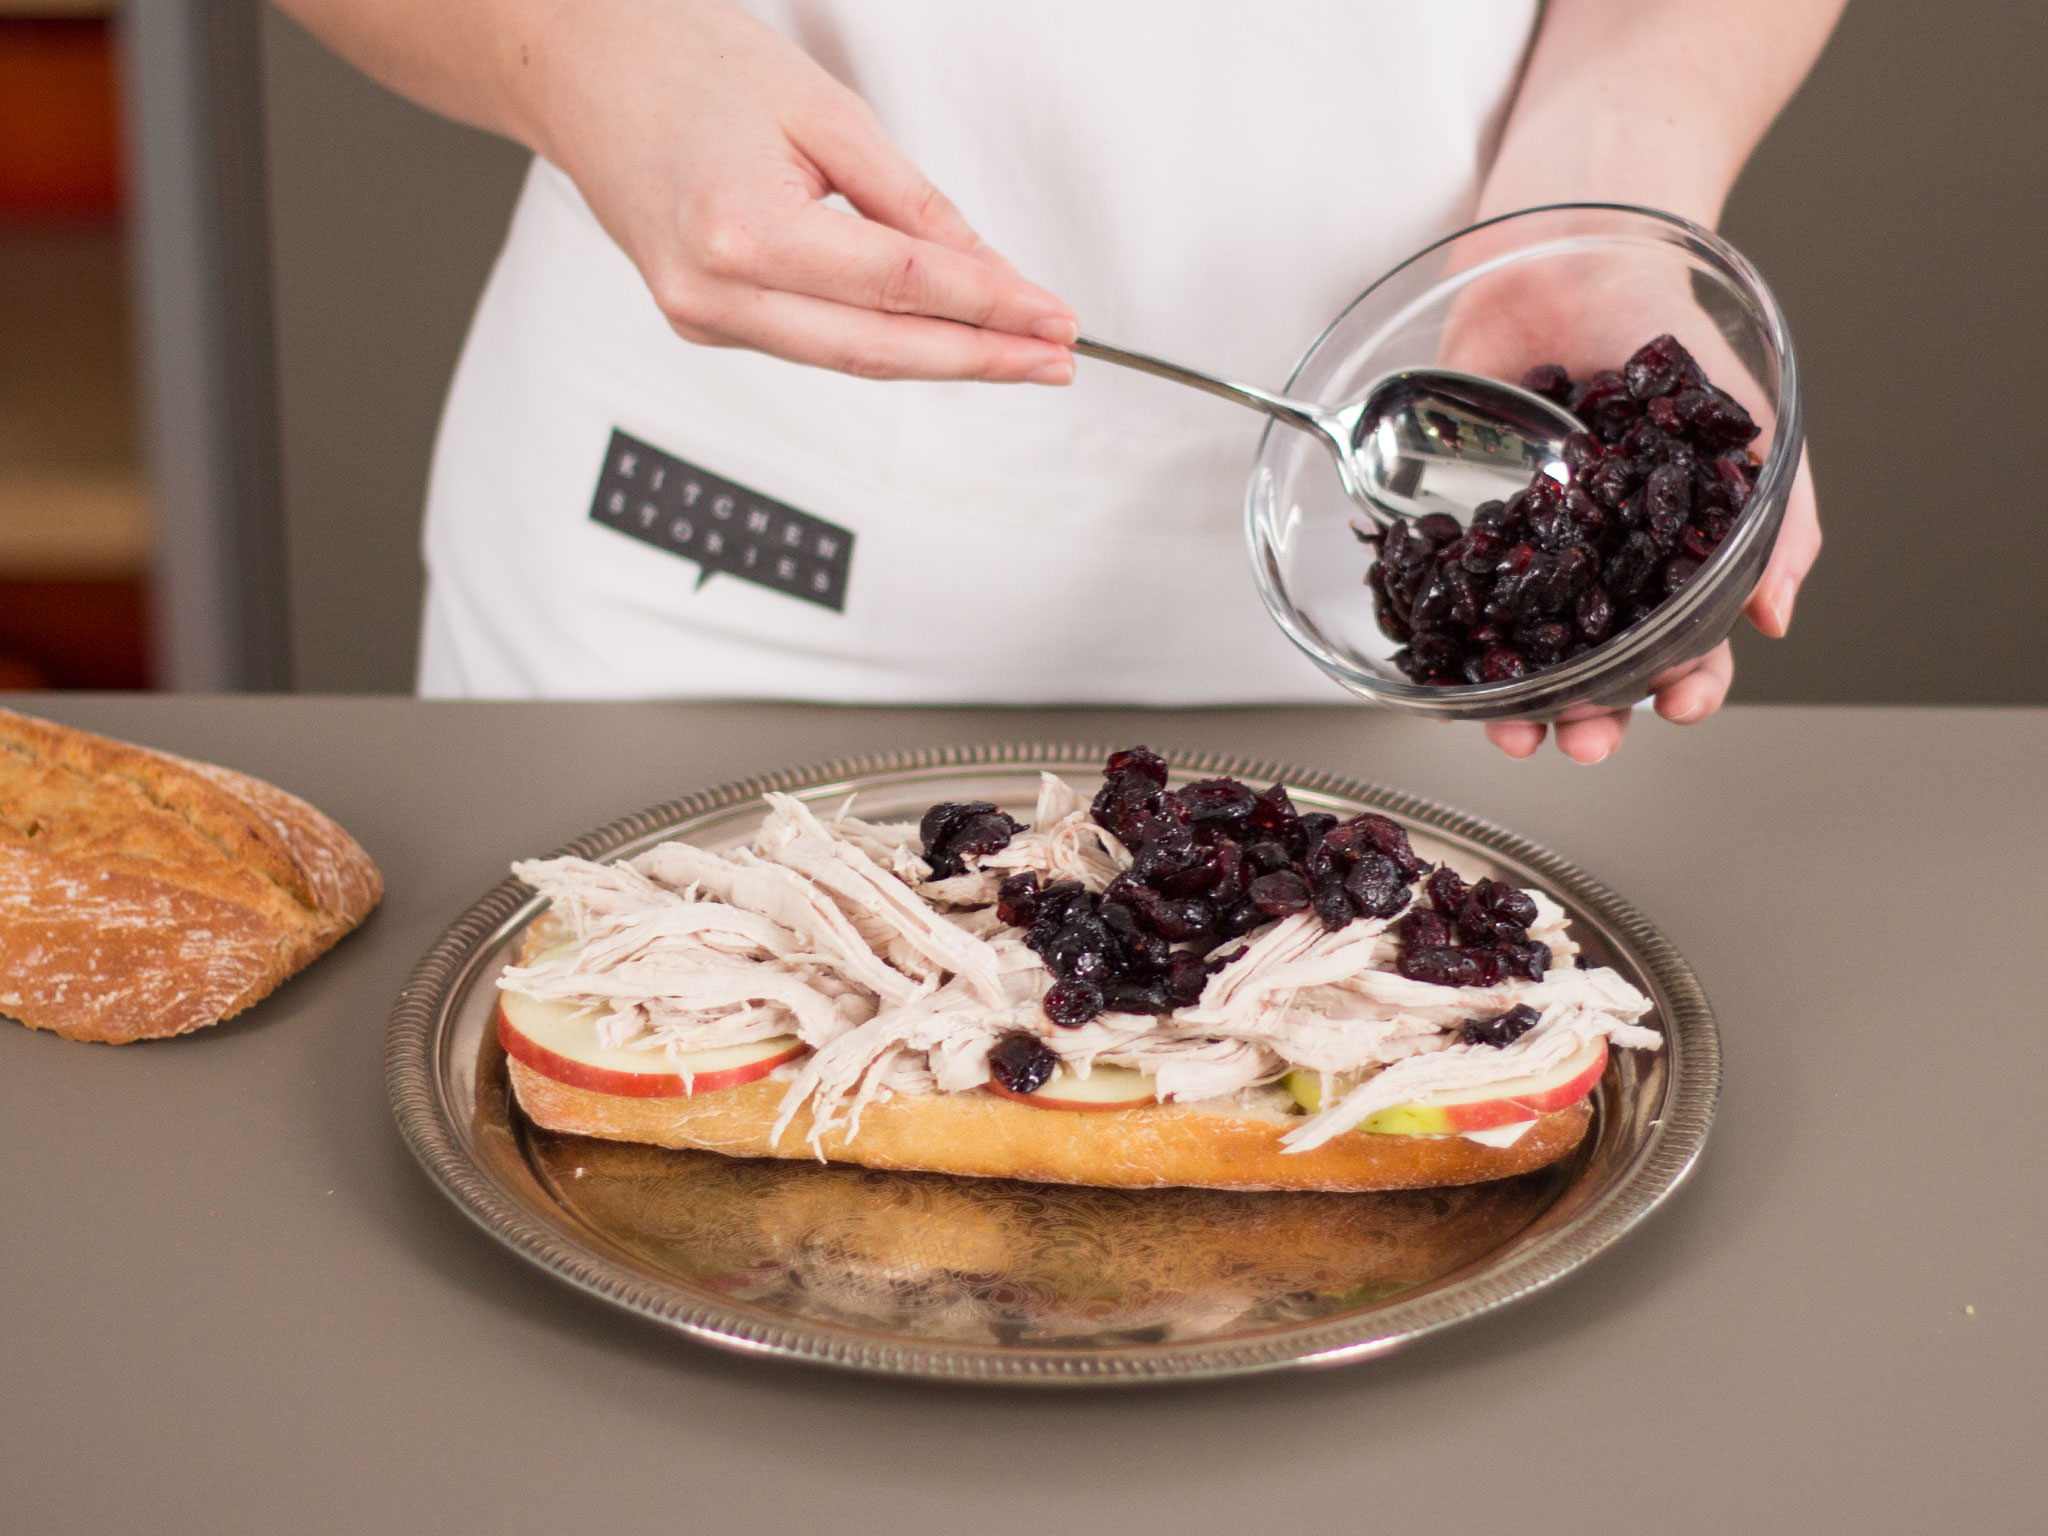 Leftover turkey sandwich with cranberry sauce